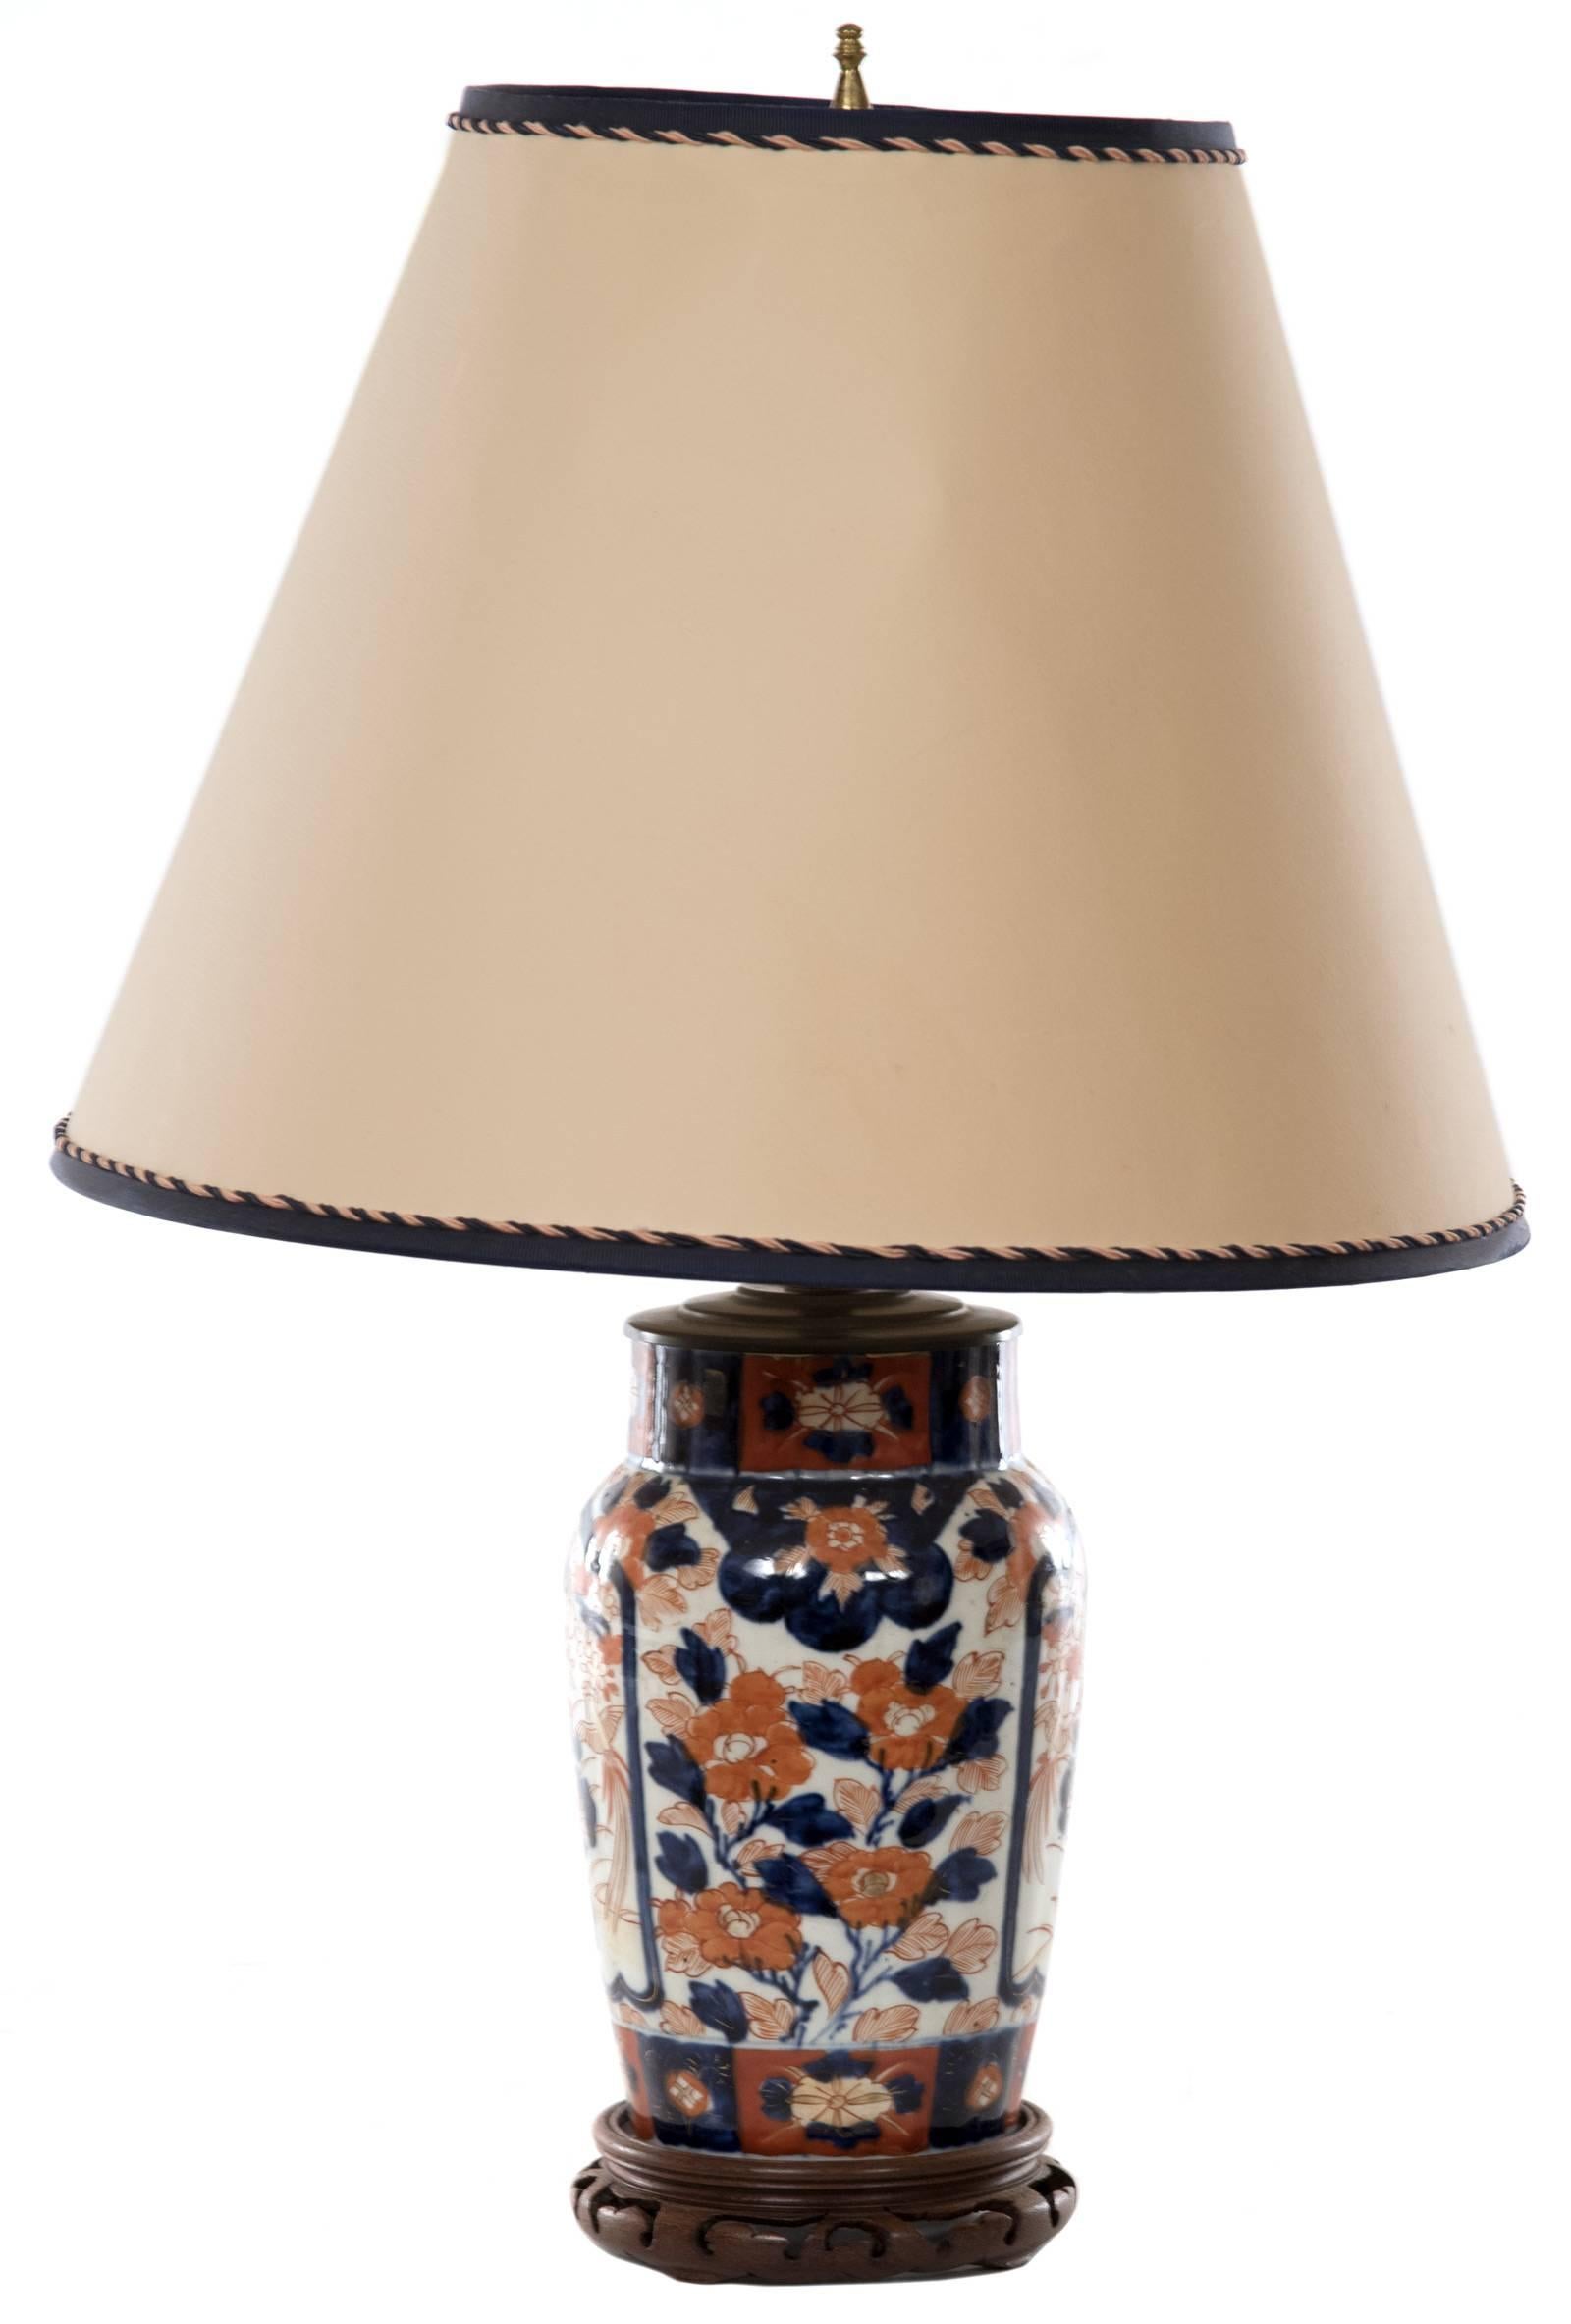 Japonisme 19th Century Japanese Imari Ovoid Porcelain Urn Table Lamp with Floral Cartouche